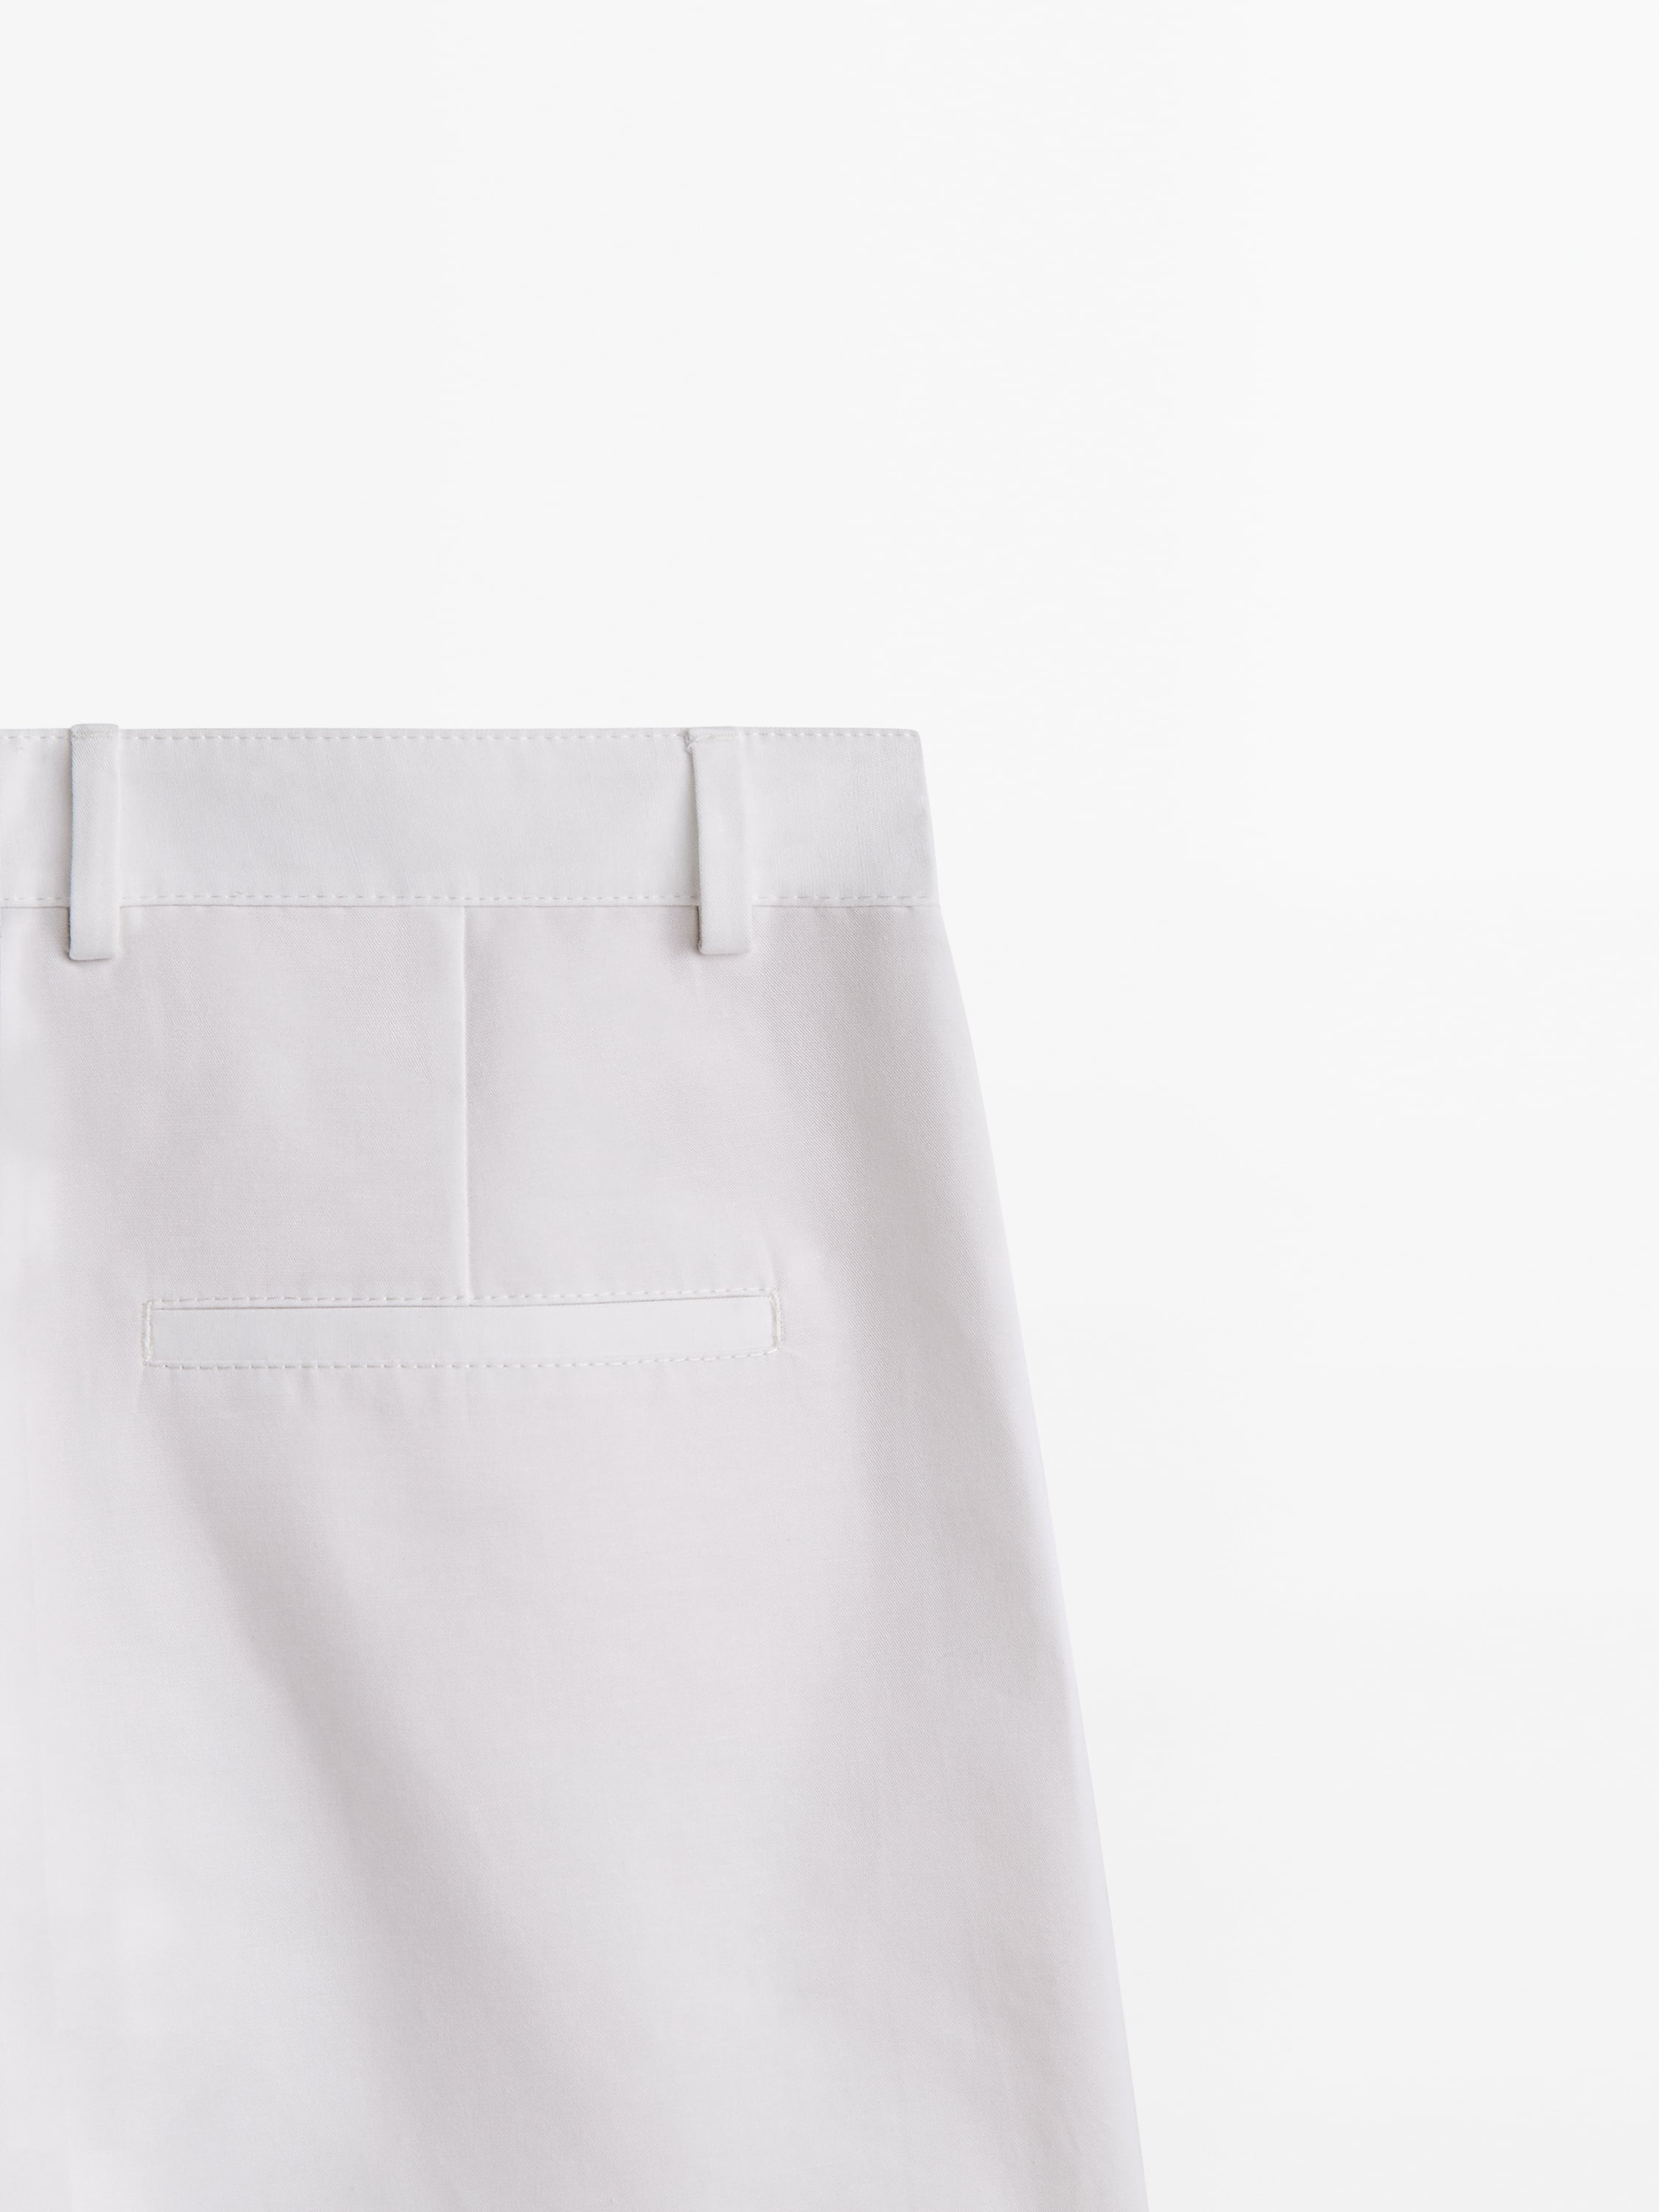 Straight-fit cotton blend trousers